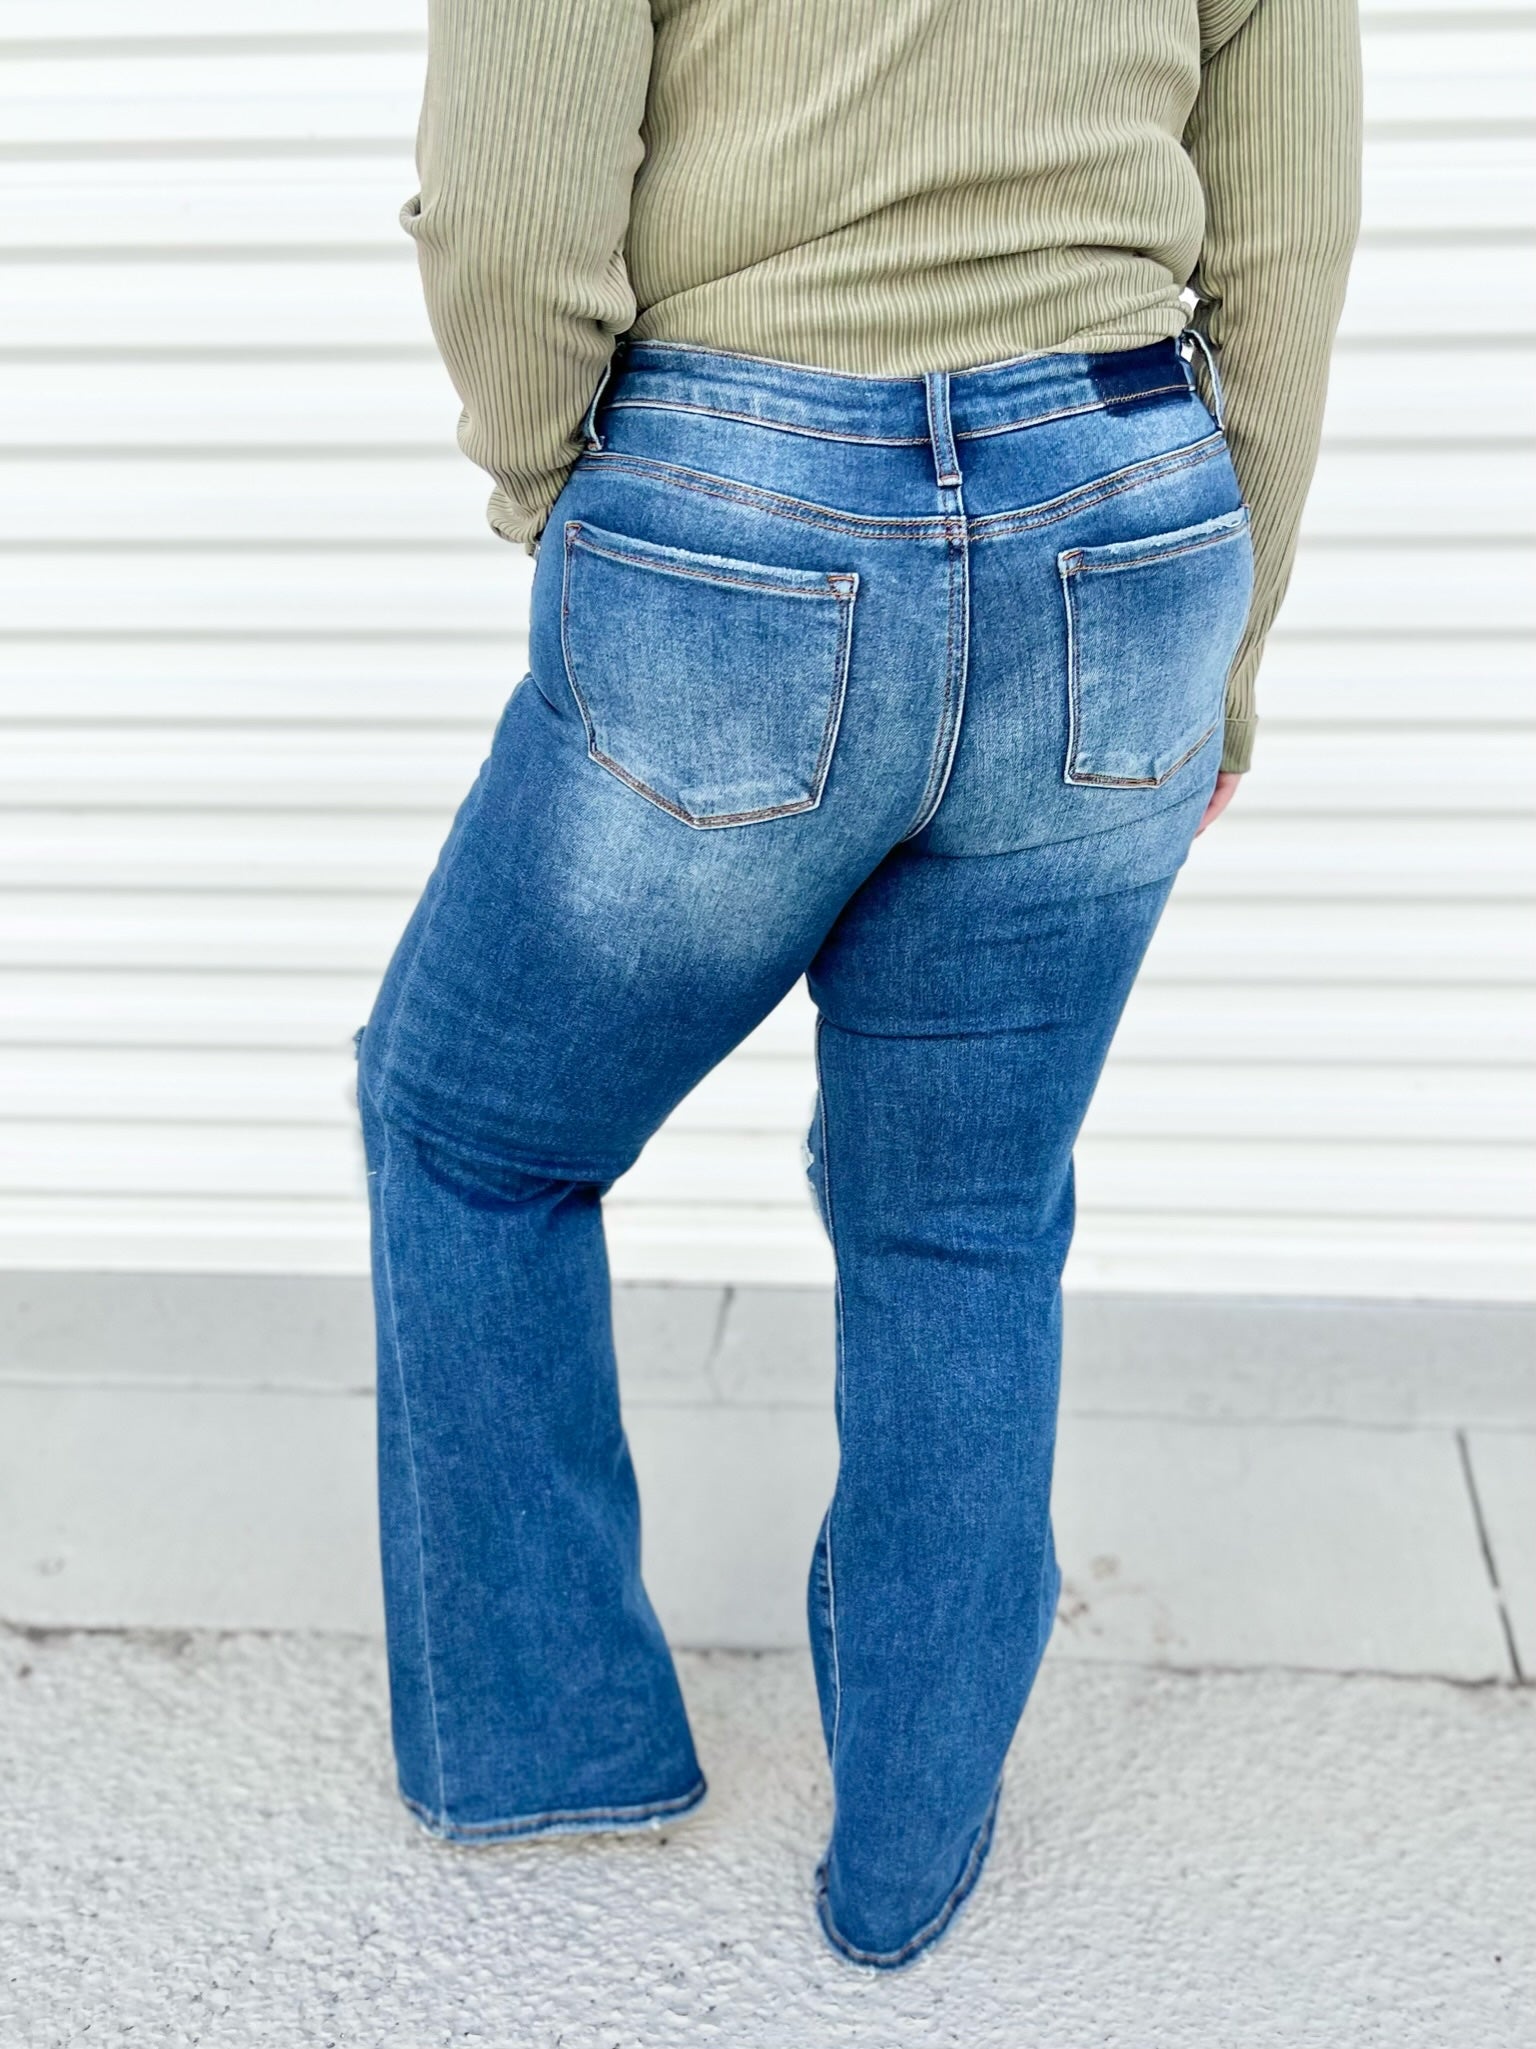 Popstar Status Flare Jeans-190 Jeans-Risen Jeans-Heathered Boho Boutique, Women's Fashion and Accessories in Palmetto, FL